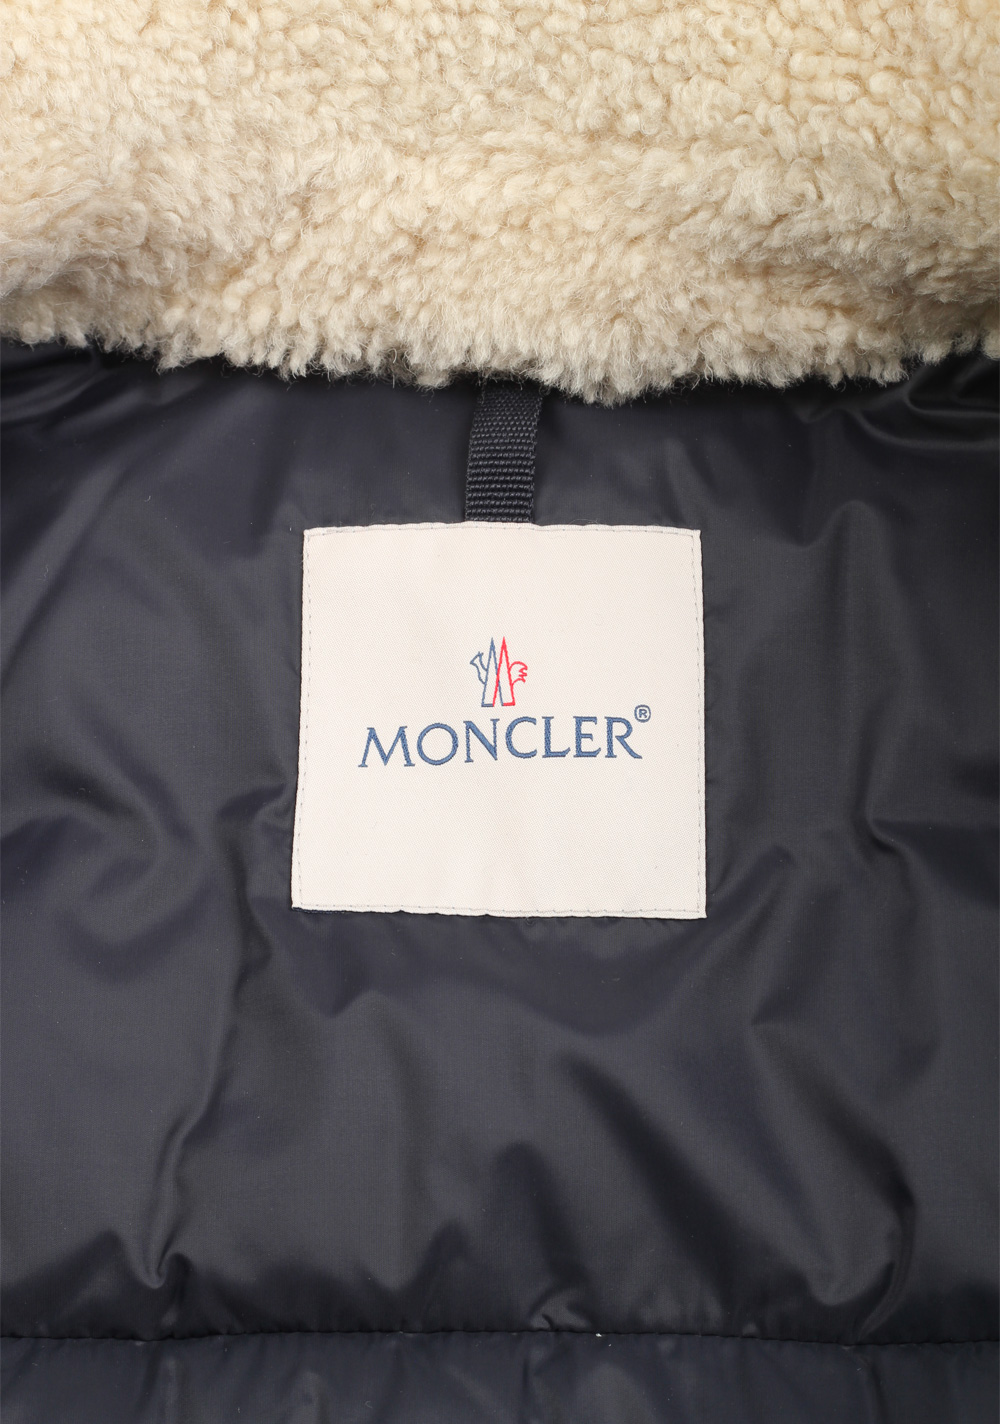 moncler size 3 in us